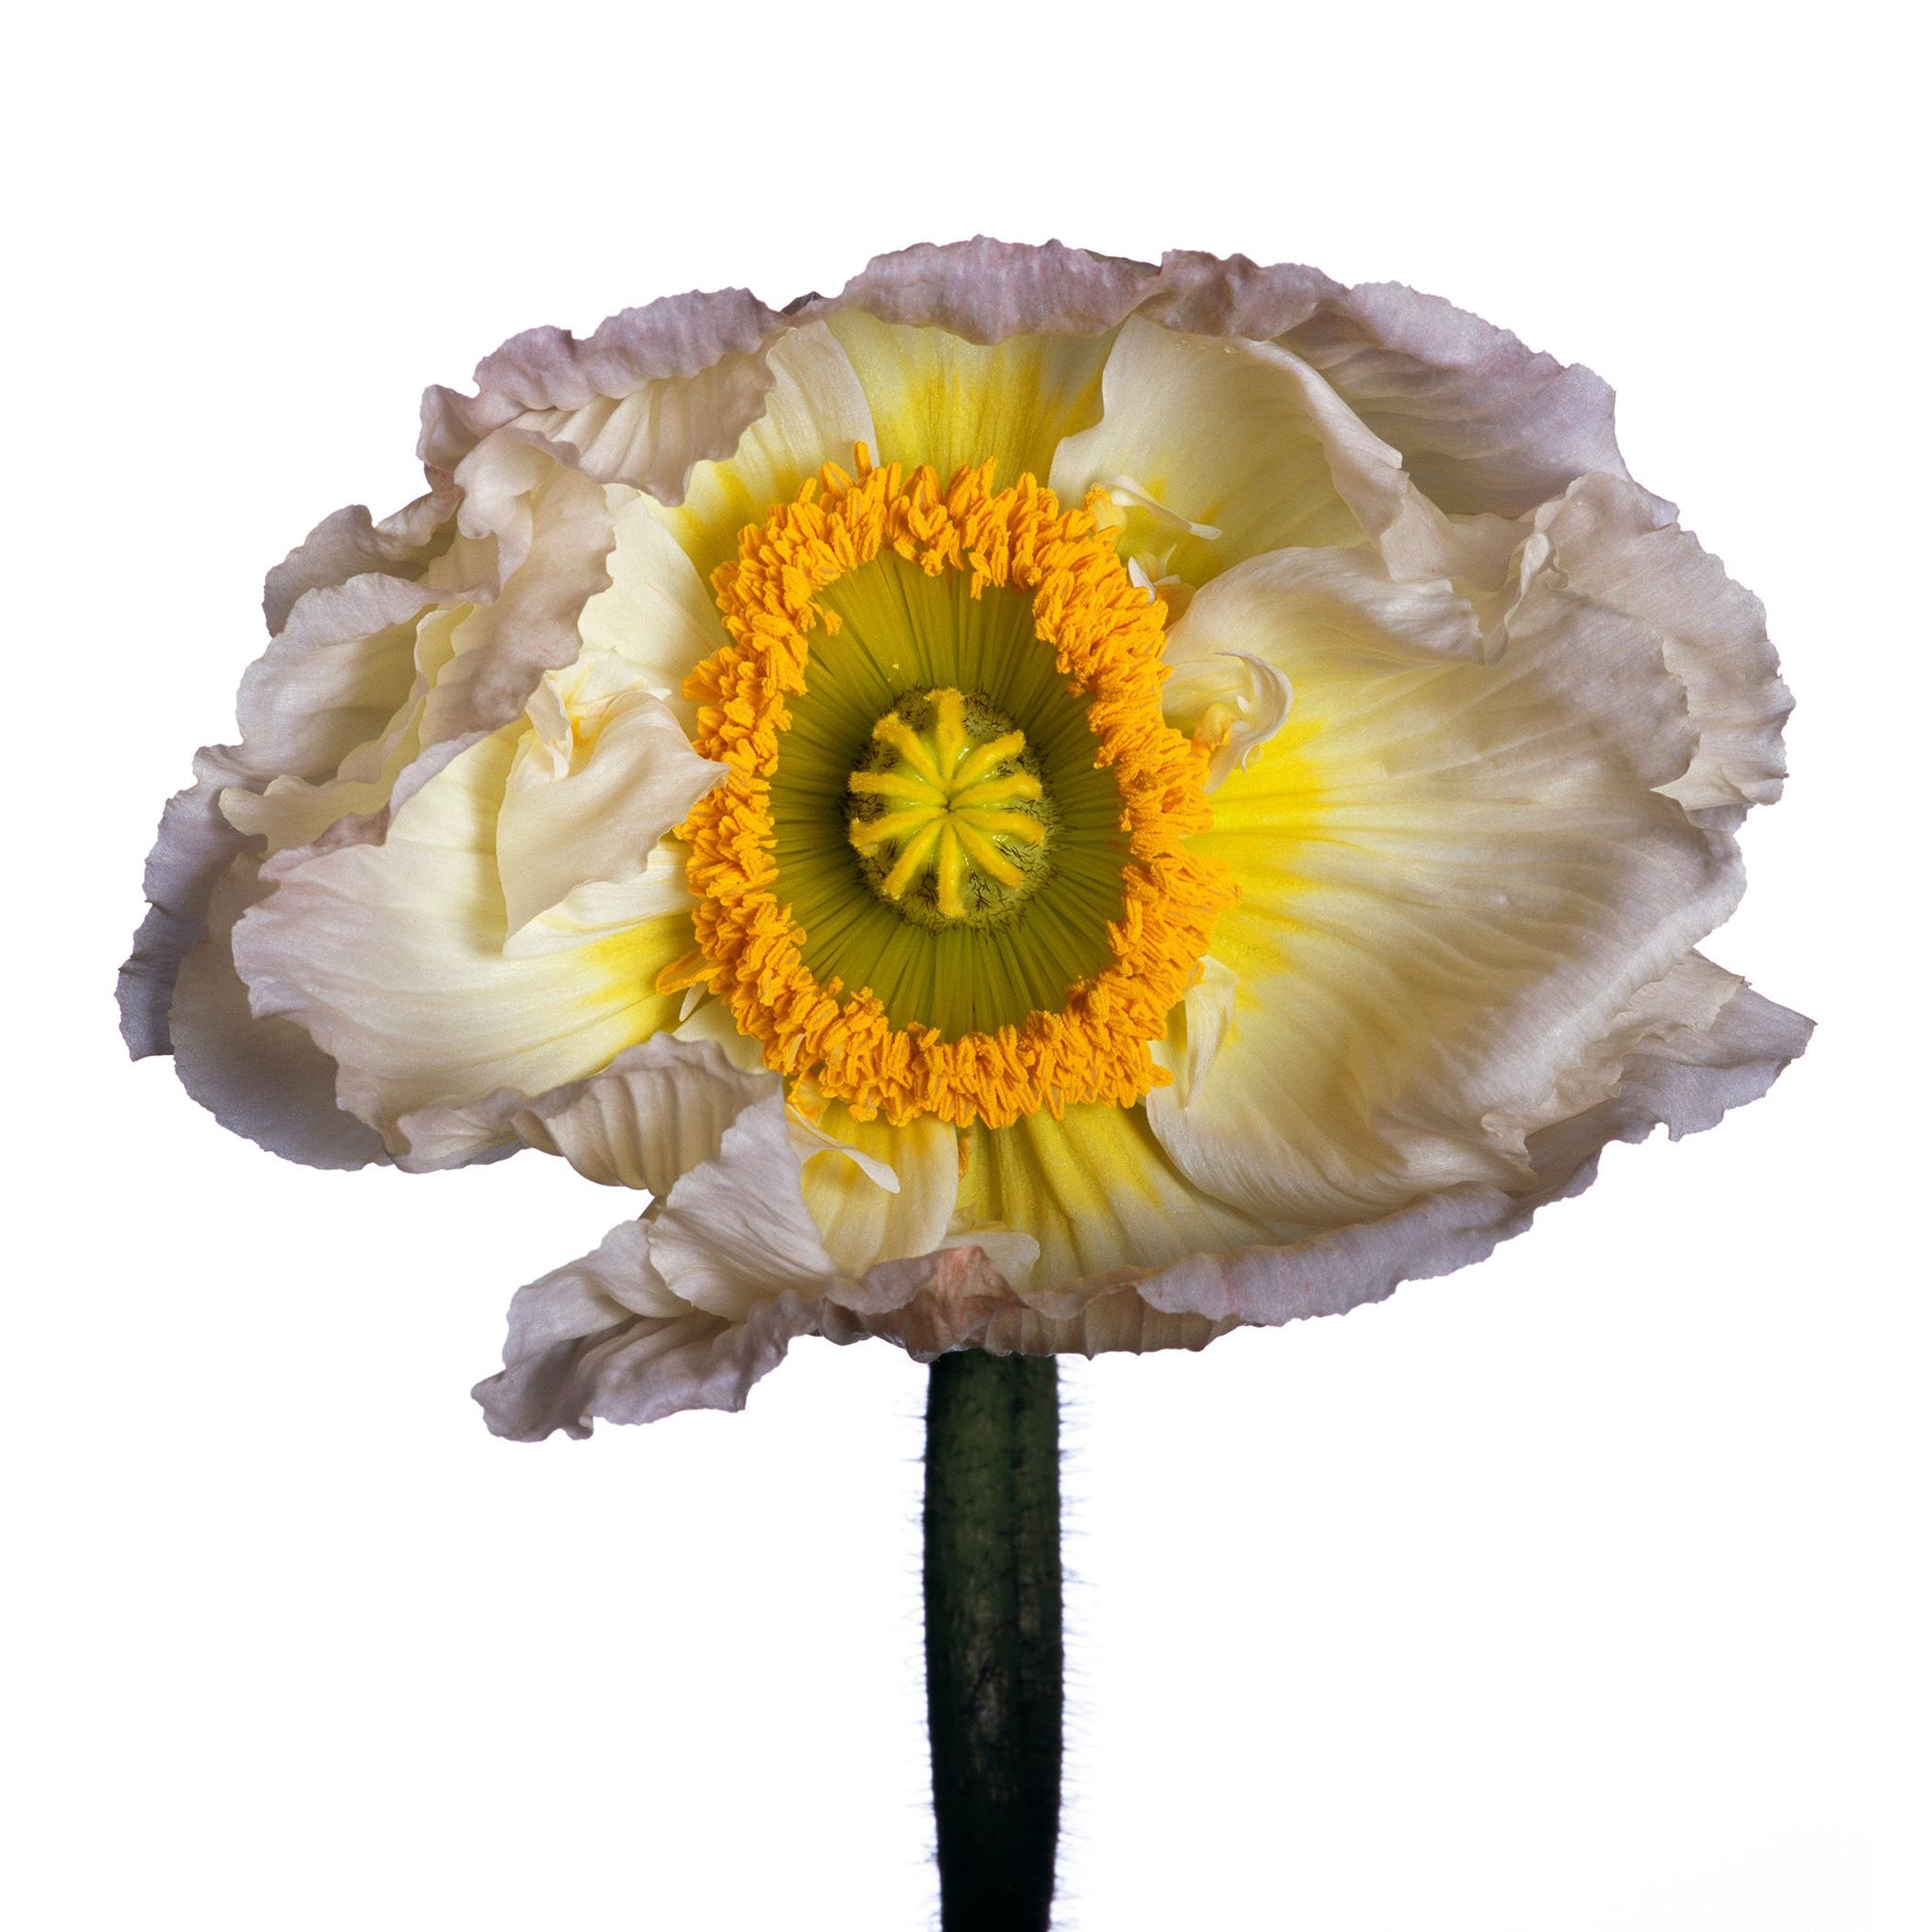 Iceland Poppy ‘B’ by Michael Zeppetello For Sale